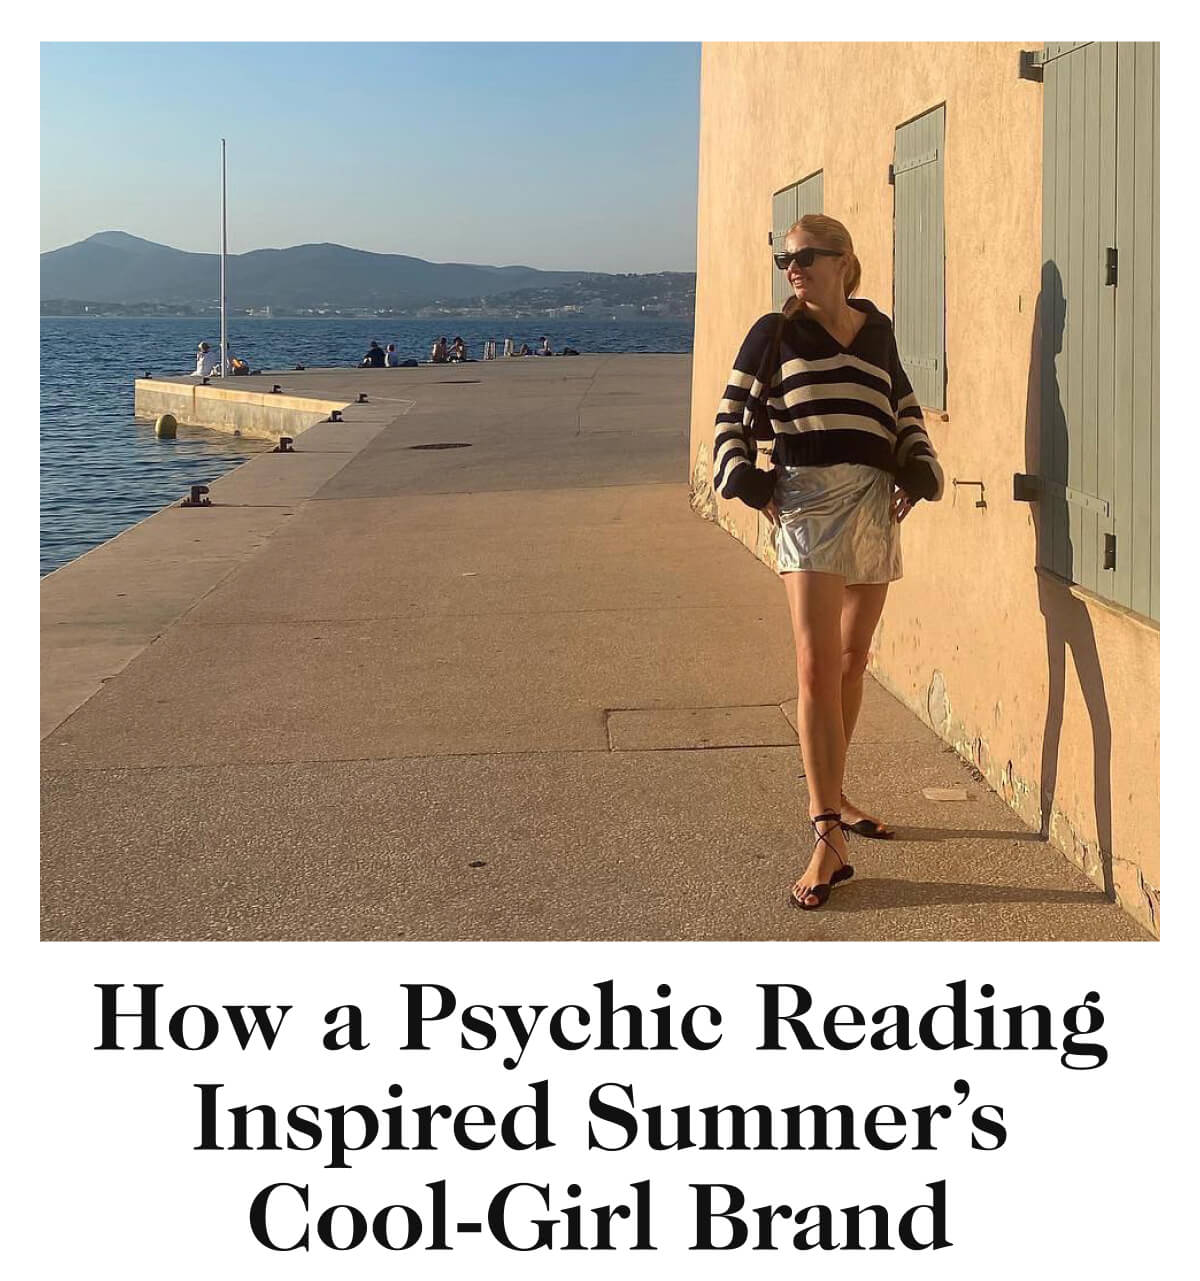 How a Psychic Reading Inspired Summer’s Cool-Girl Brand